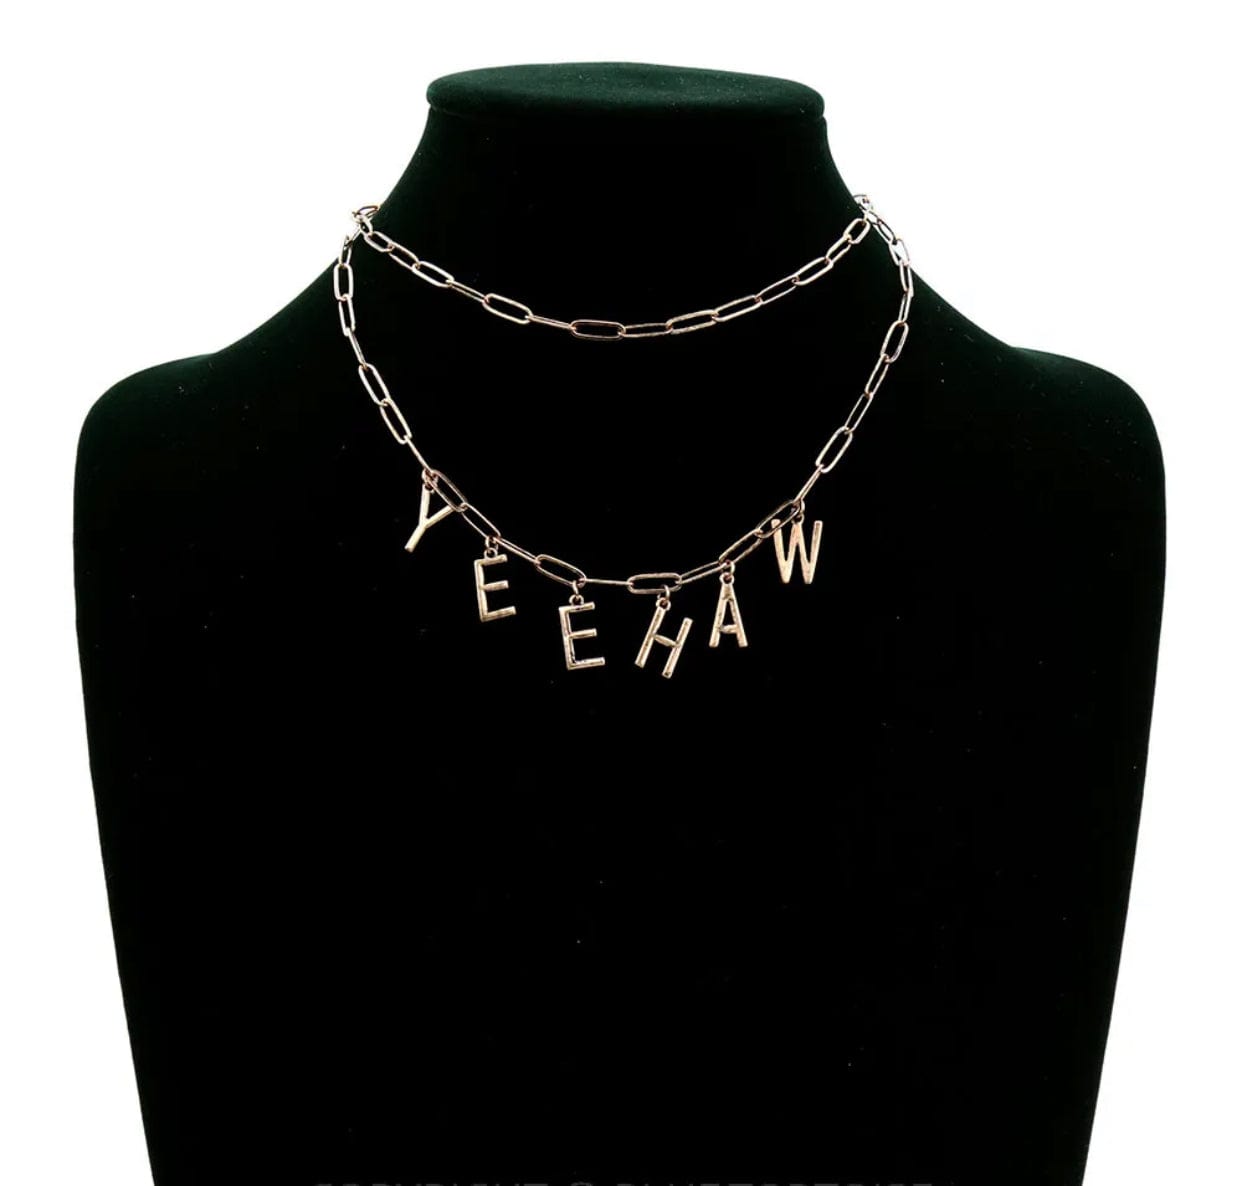 Yee Haw Layered Chain Necklace